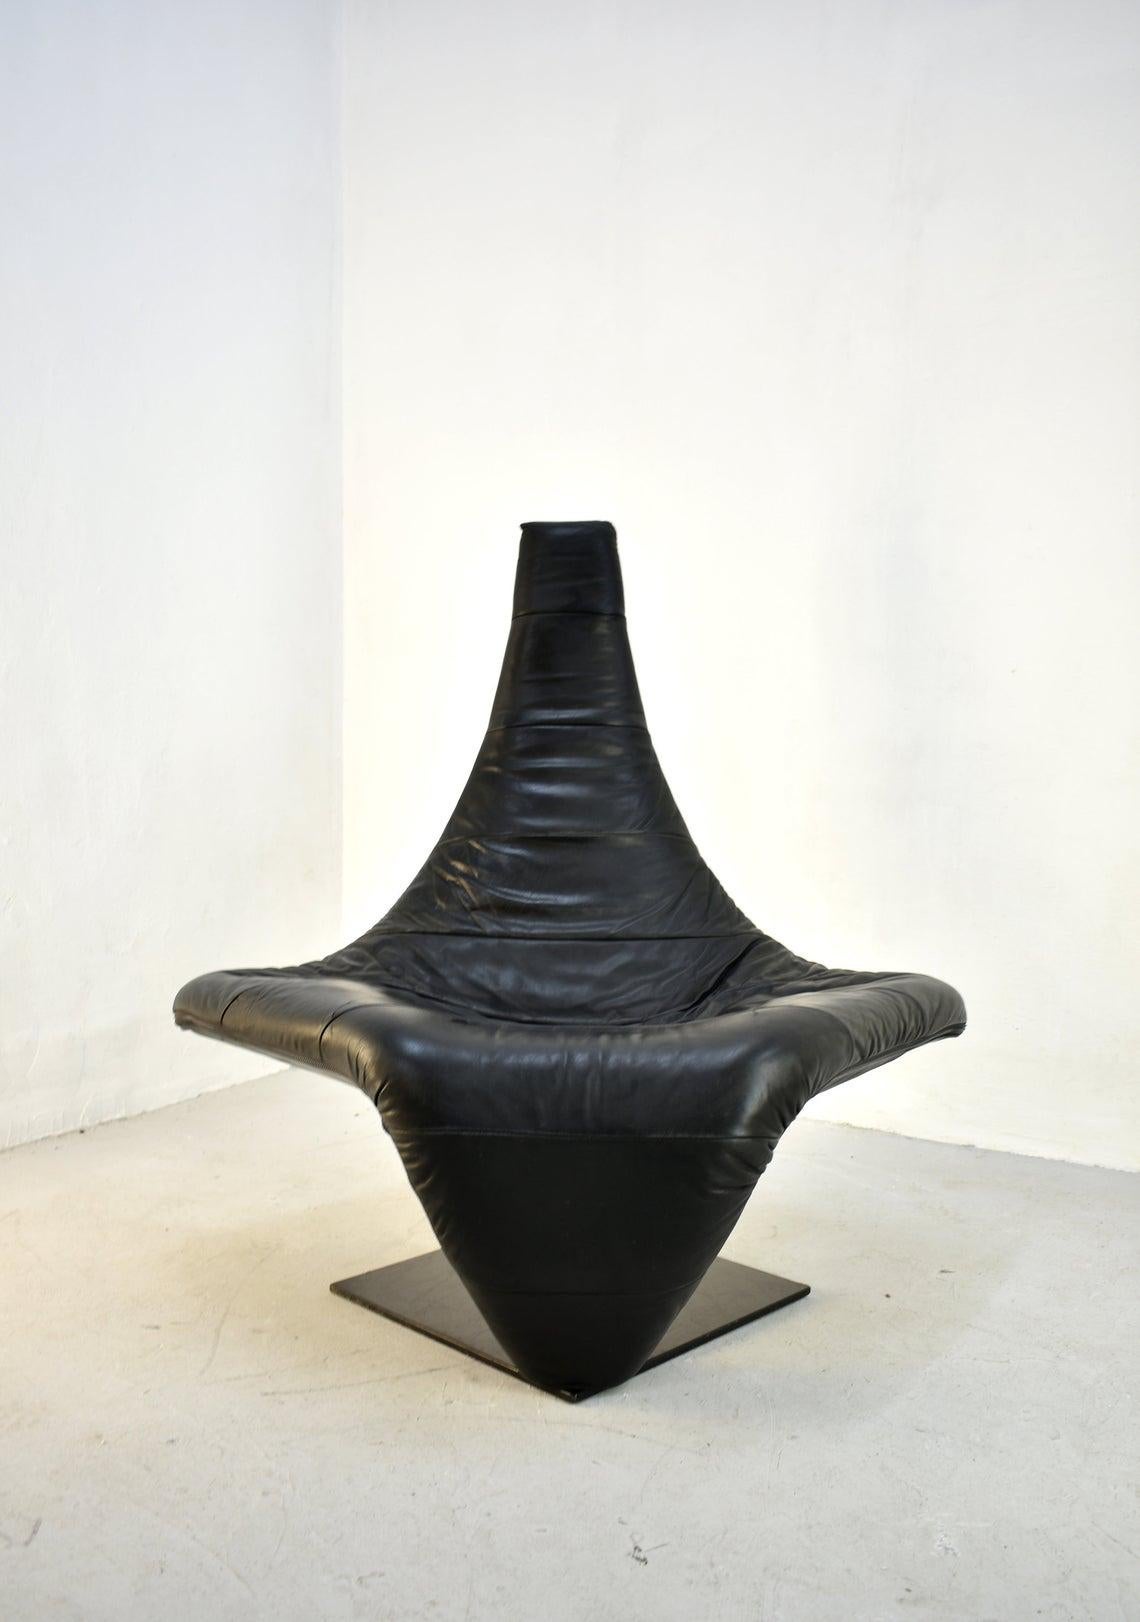 This is a 1980s black leather lounge chair 'Turner', also known as 'Cobra'

Designed by Jack Crebolder for Harvink, The Netherlands 1982

The chair is in good vintage condition, there are some age and use related traces of cosmetic wear. On one